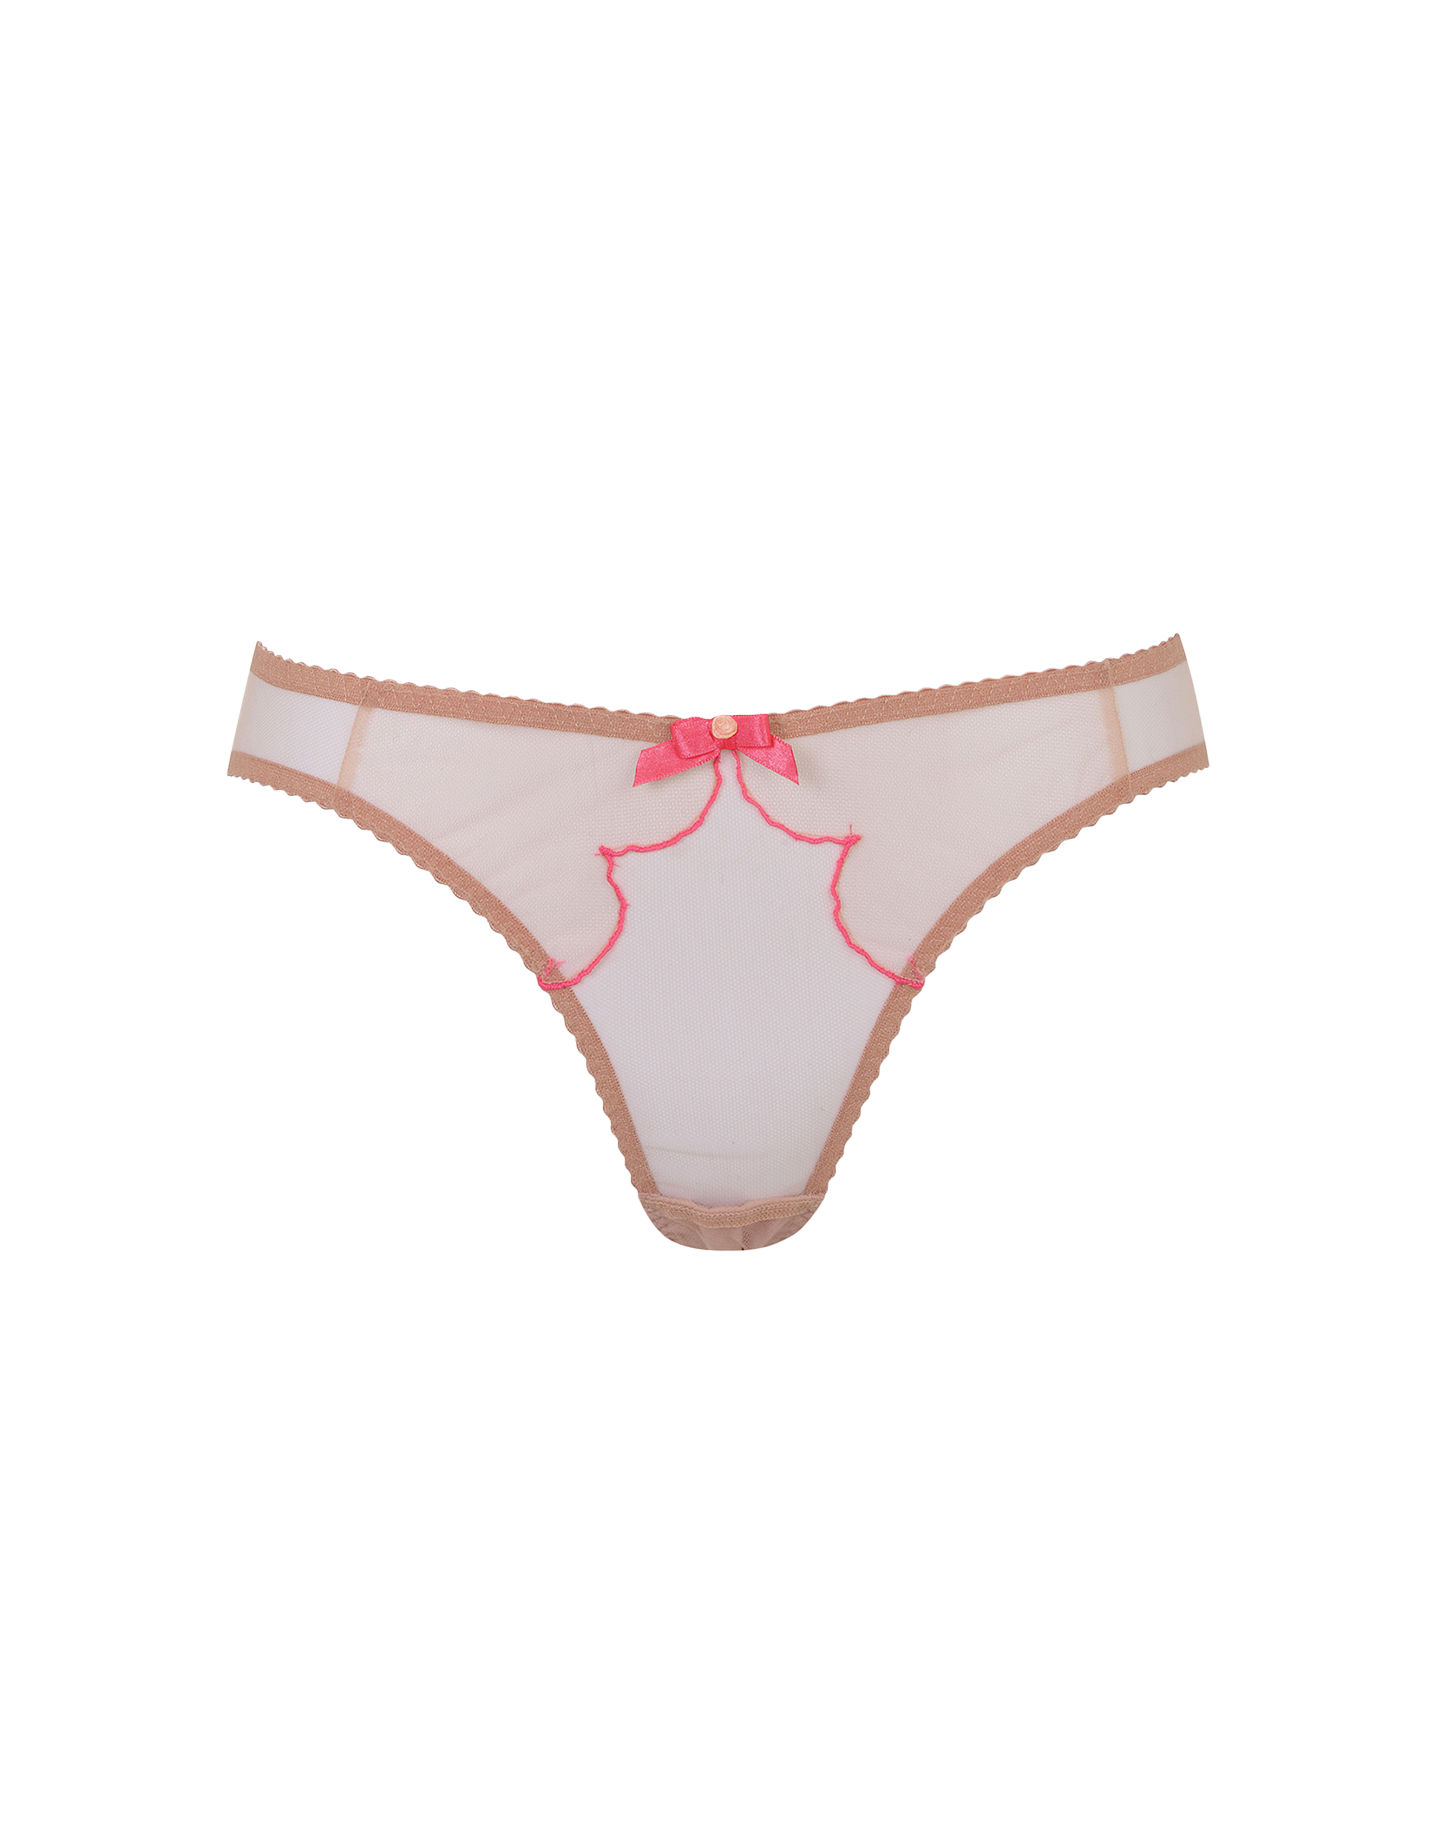 Lorna Full Brief in Nude/Pink | By Agent Provocateur